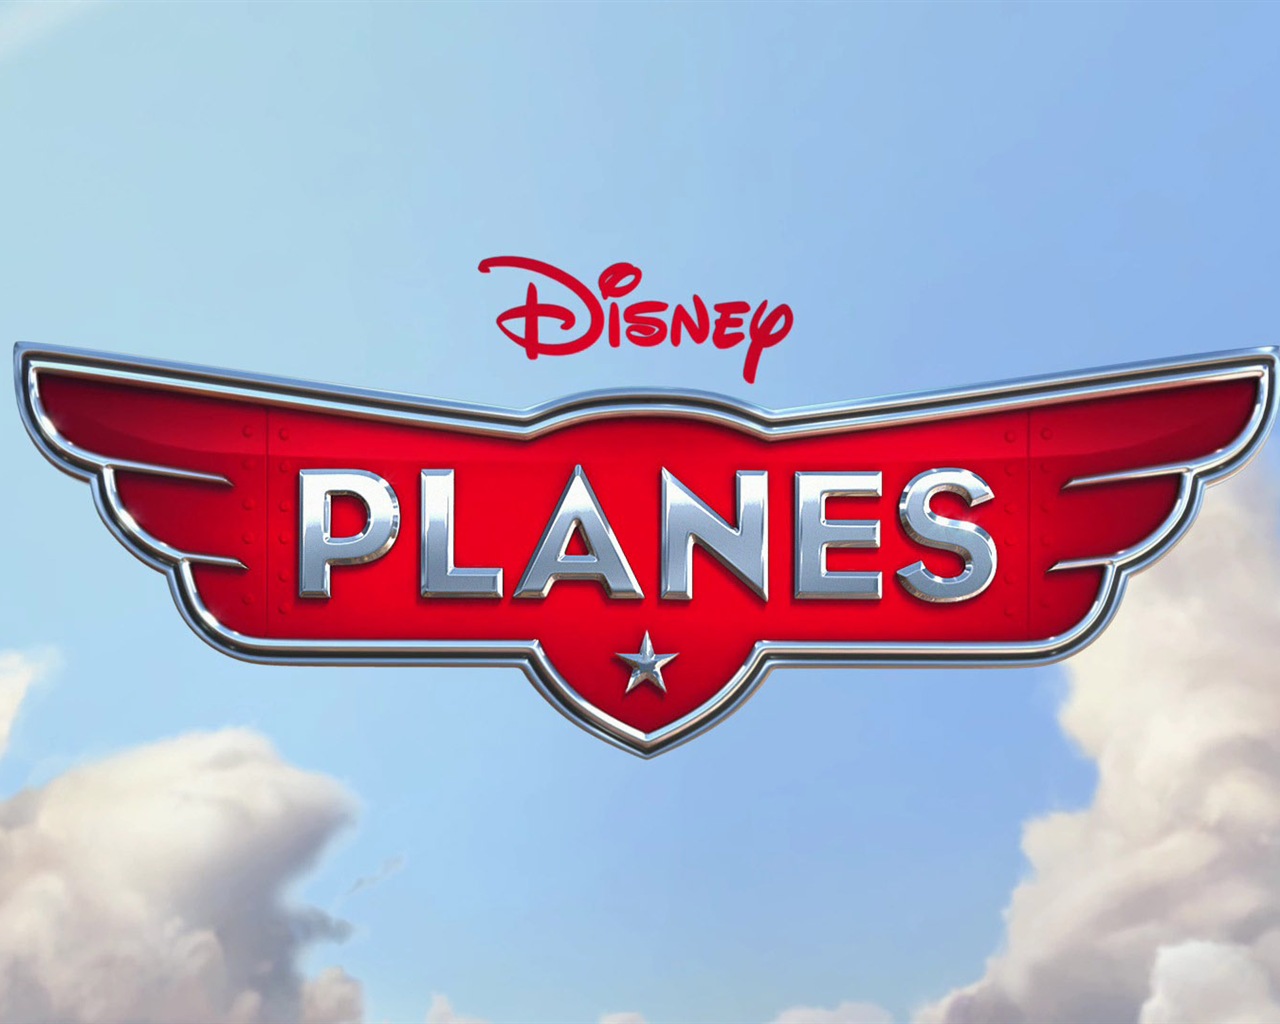 Planes 2013 HD wallpapers #11 - 1280x1024